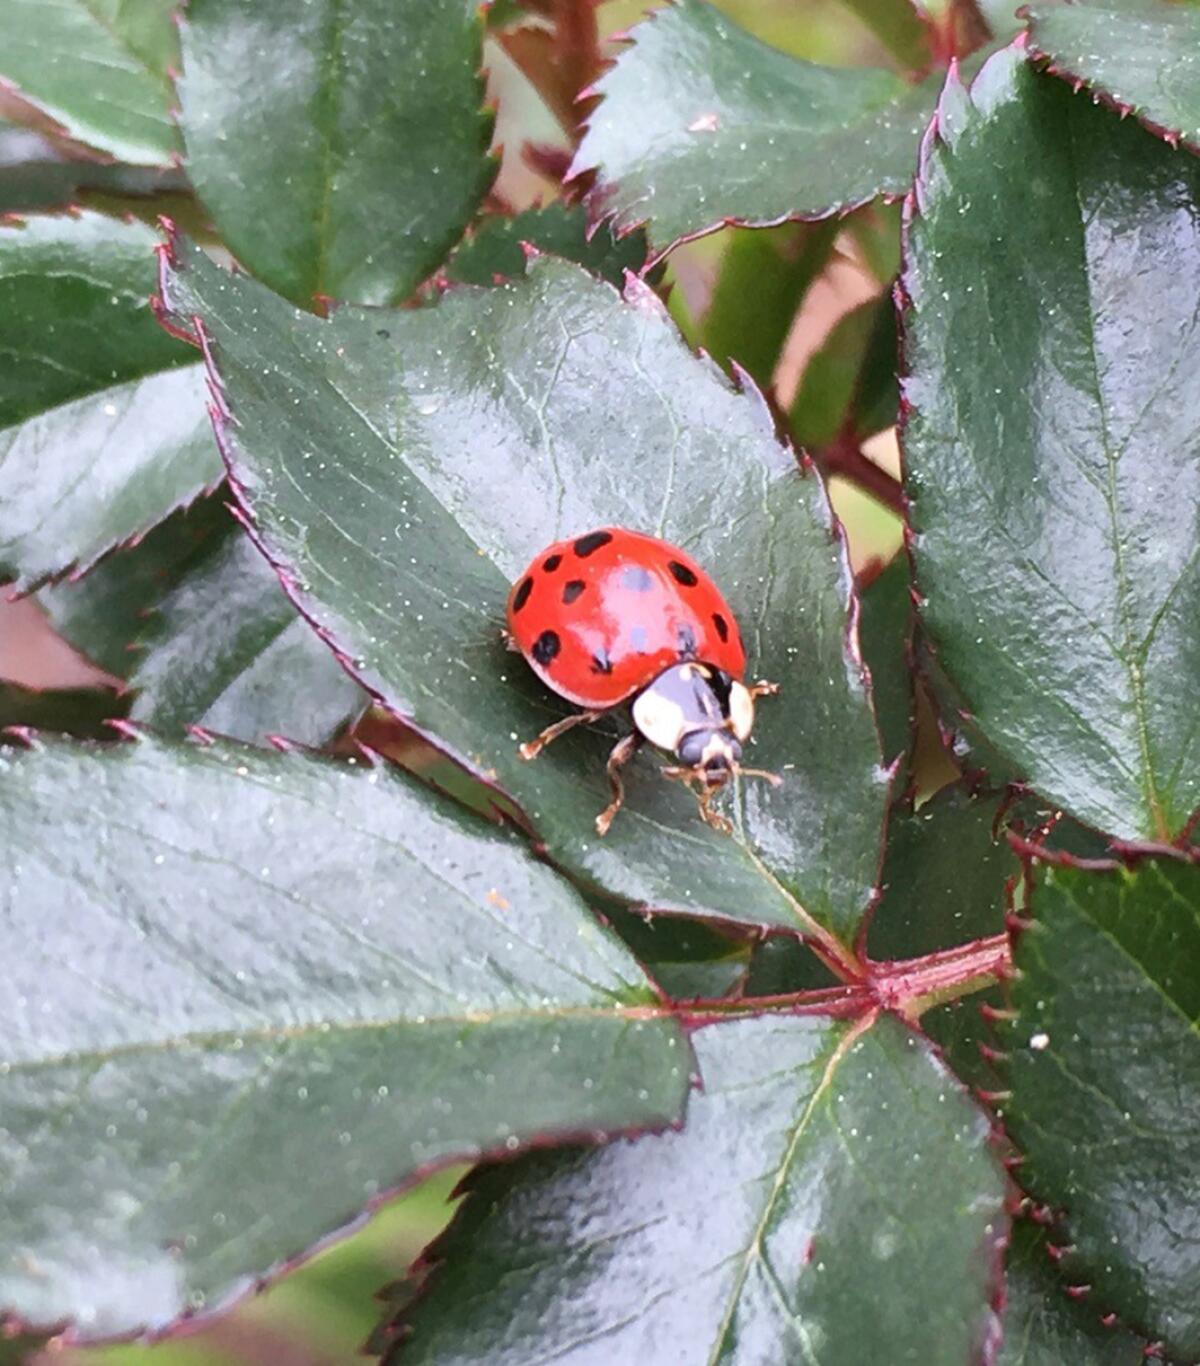 The lady beetle is a beneficial insect in the garden.